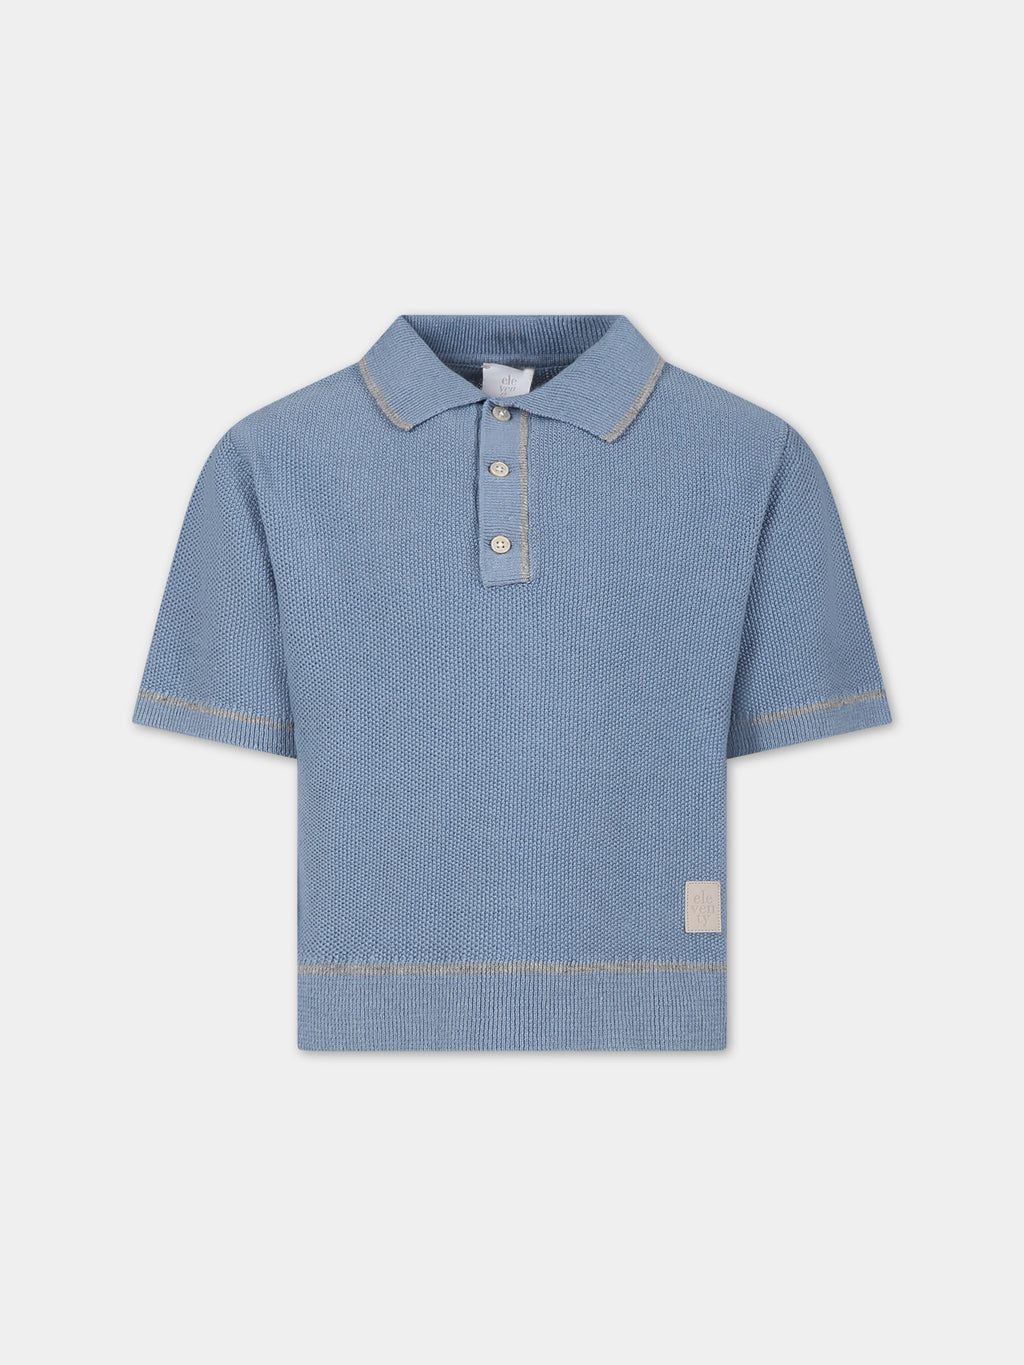 Blue polo shirt for boy with logo